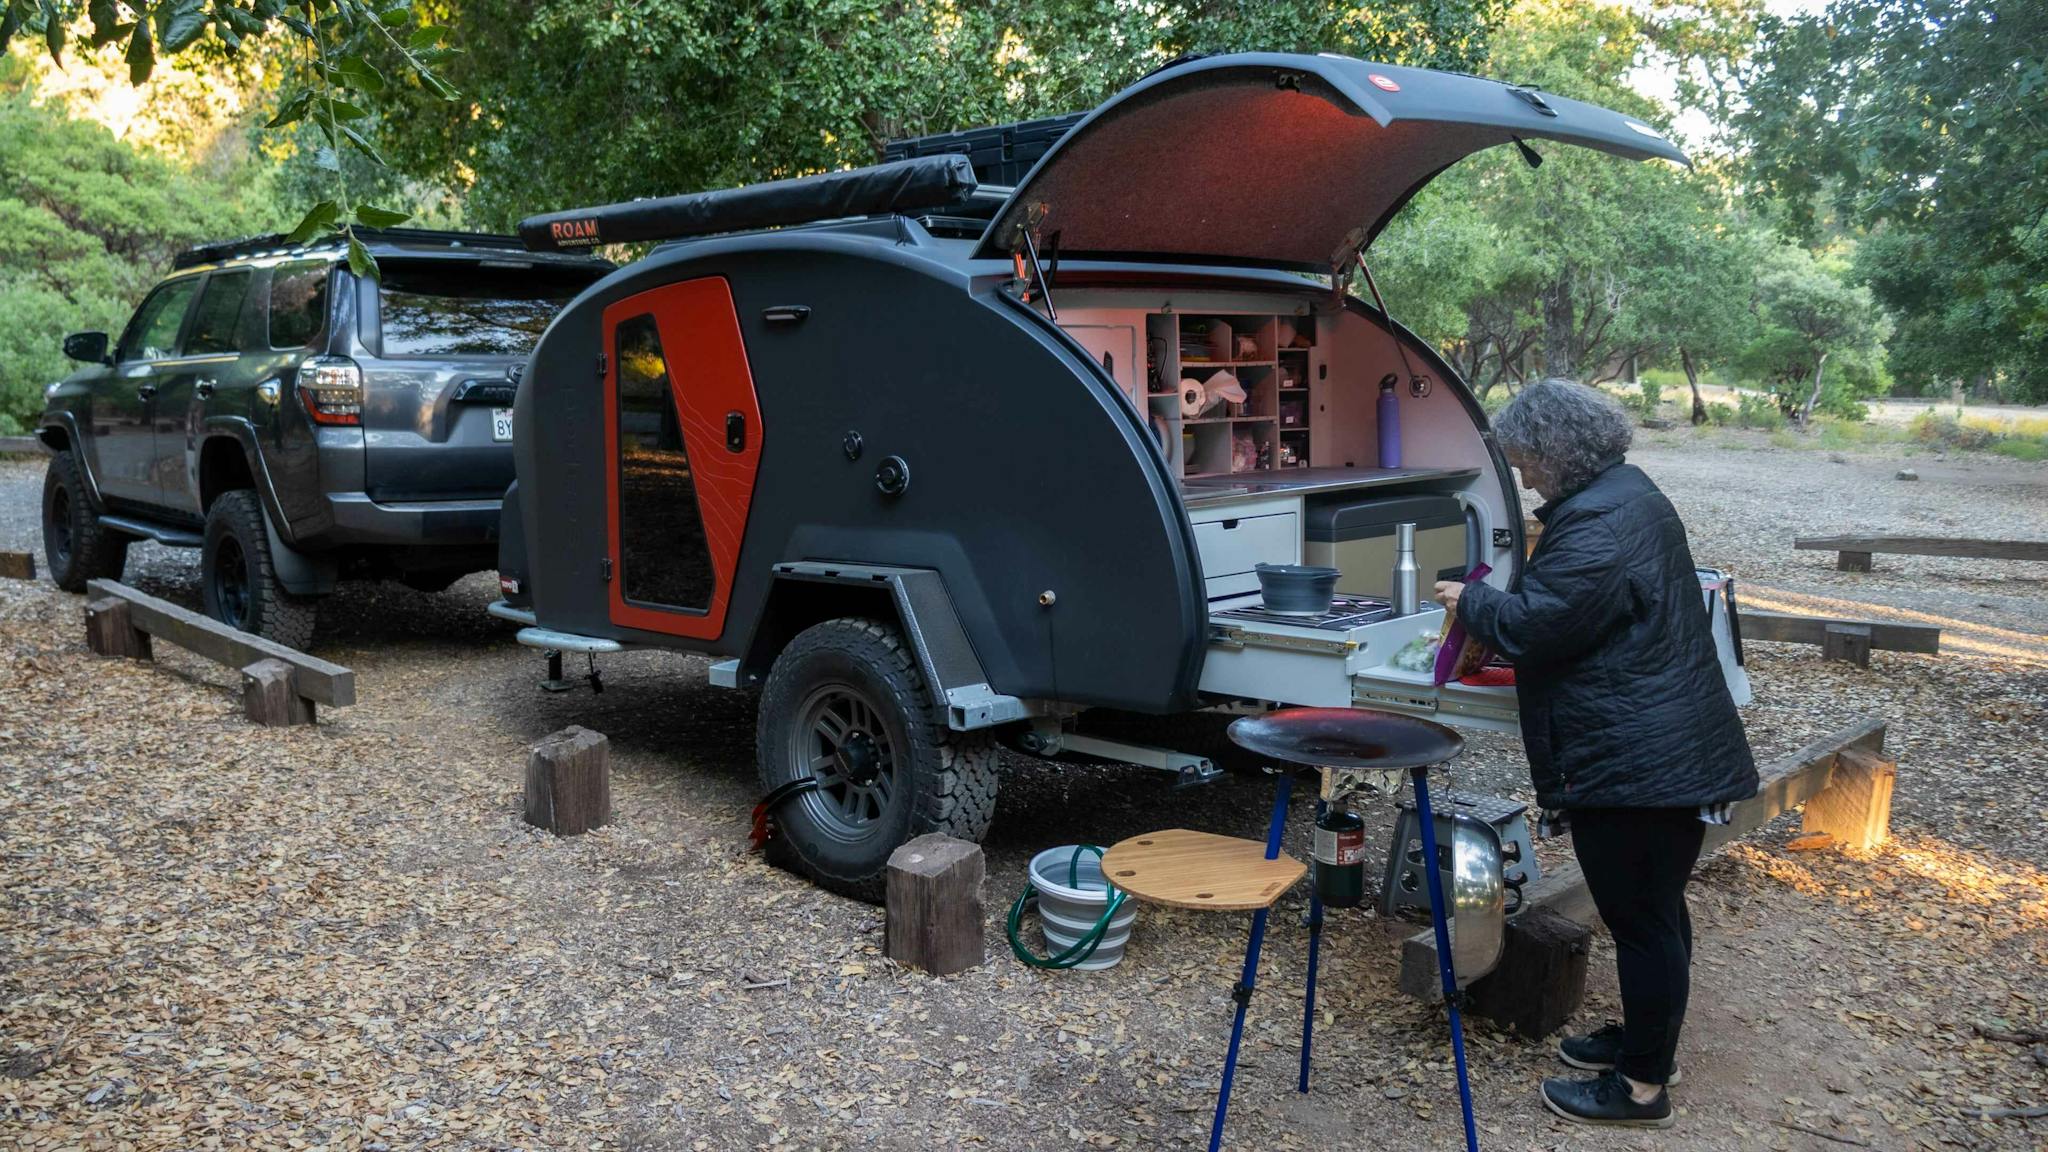 The galley of a TOPO2 Voyager being used at a campsite